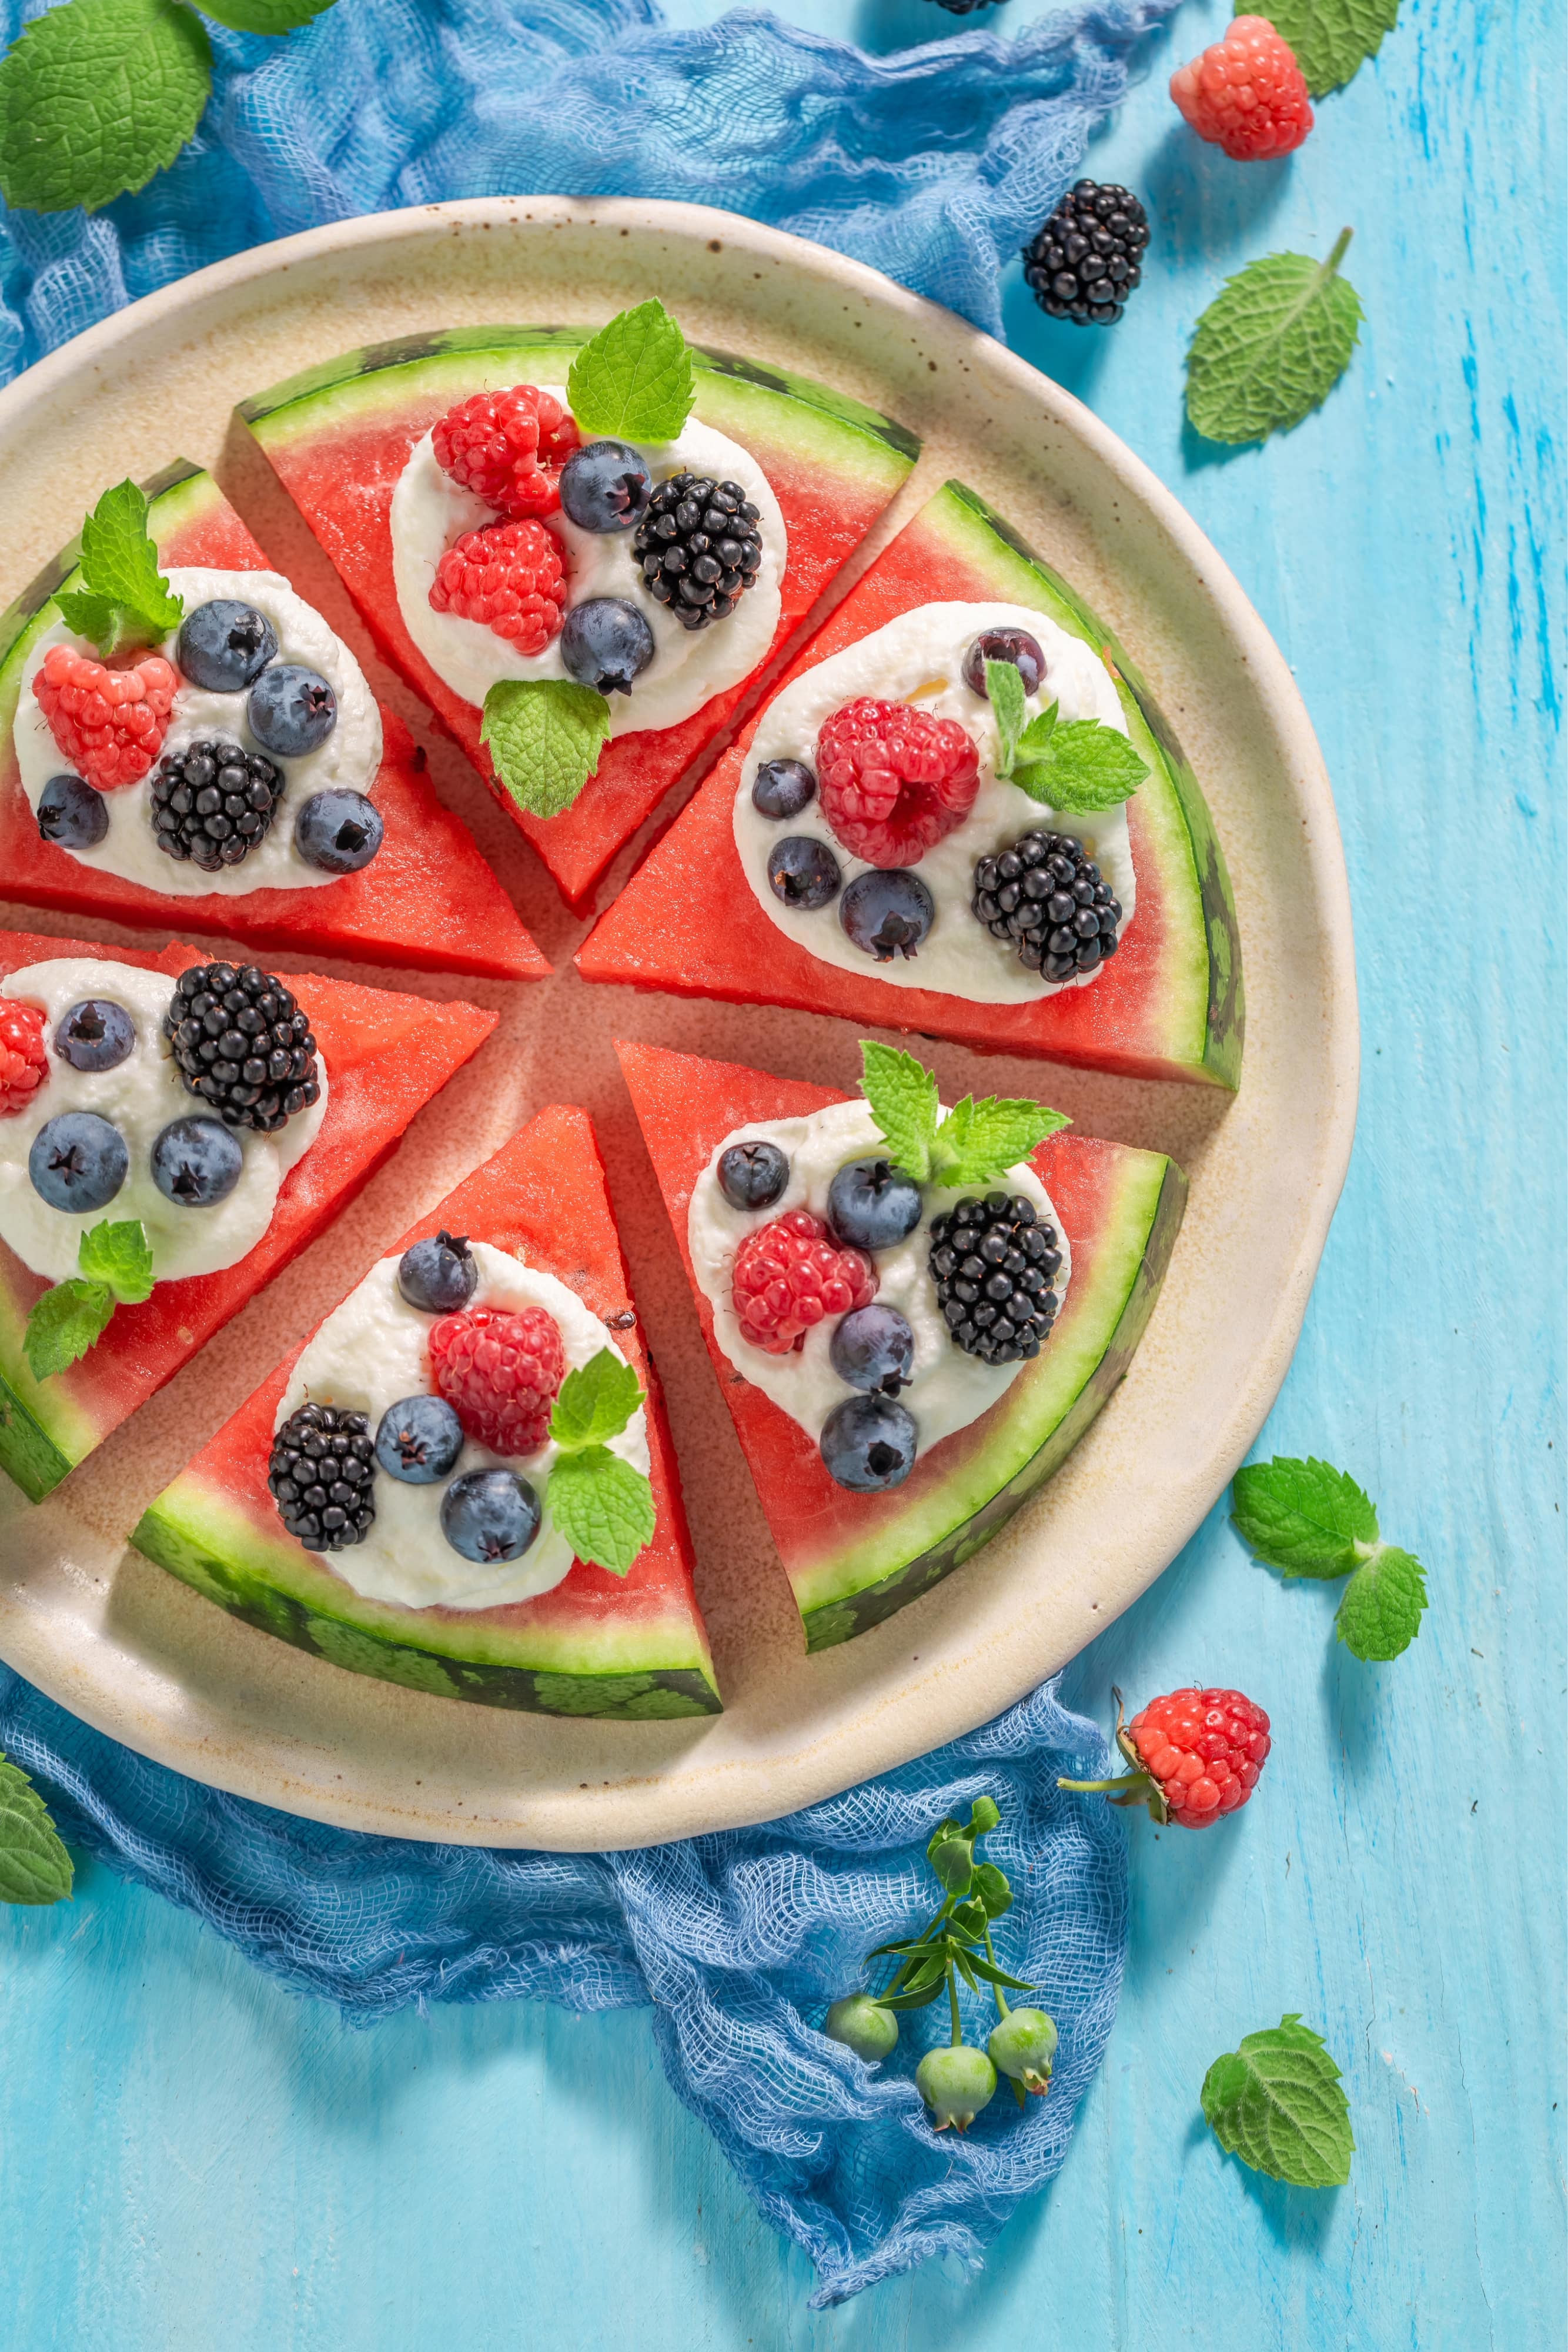 Juicy and sweet watermelon pizza with berries, cream and mint